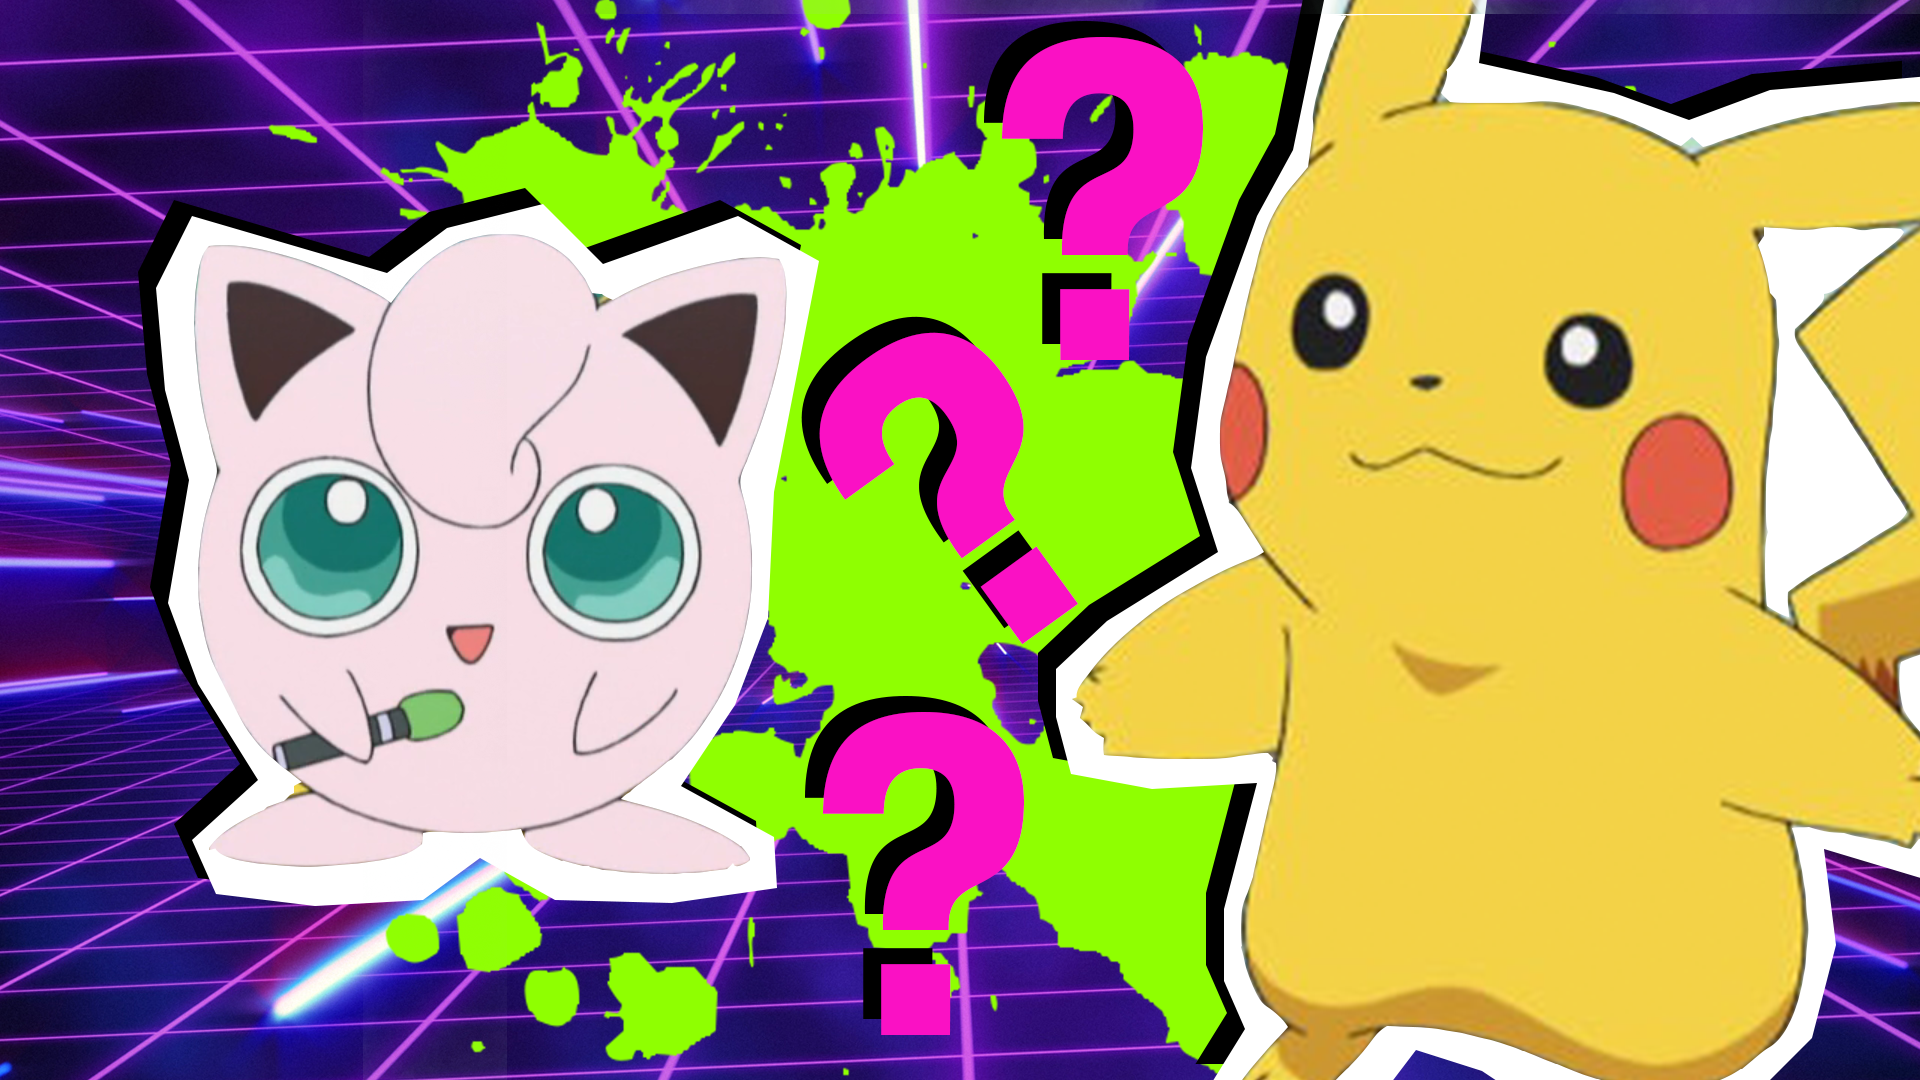 𝙒𝙃𝙔𝙇𝘿𝙀 on X: Which Mega Evolution are you most excited for